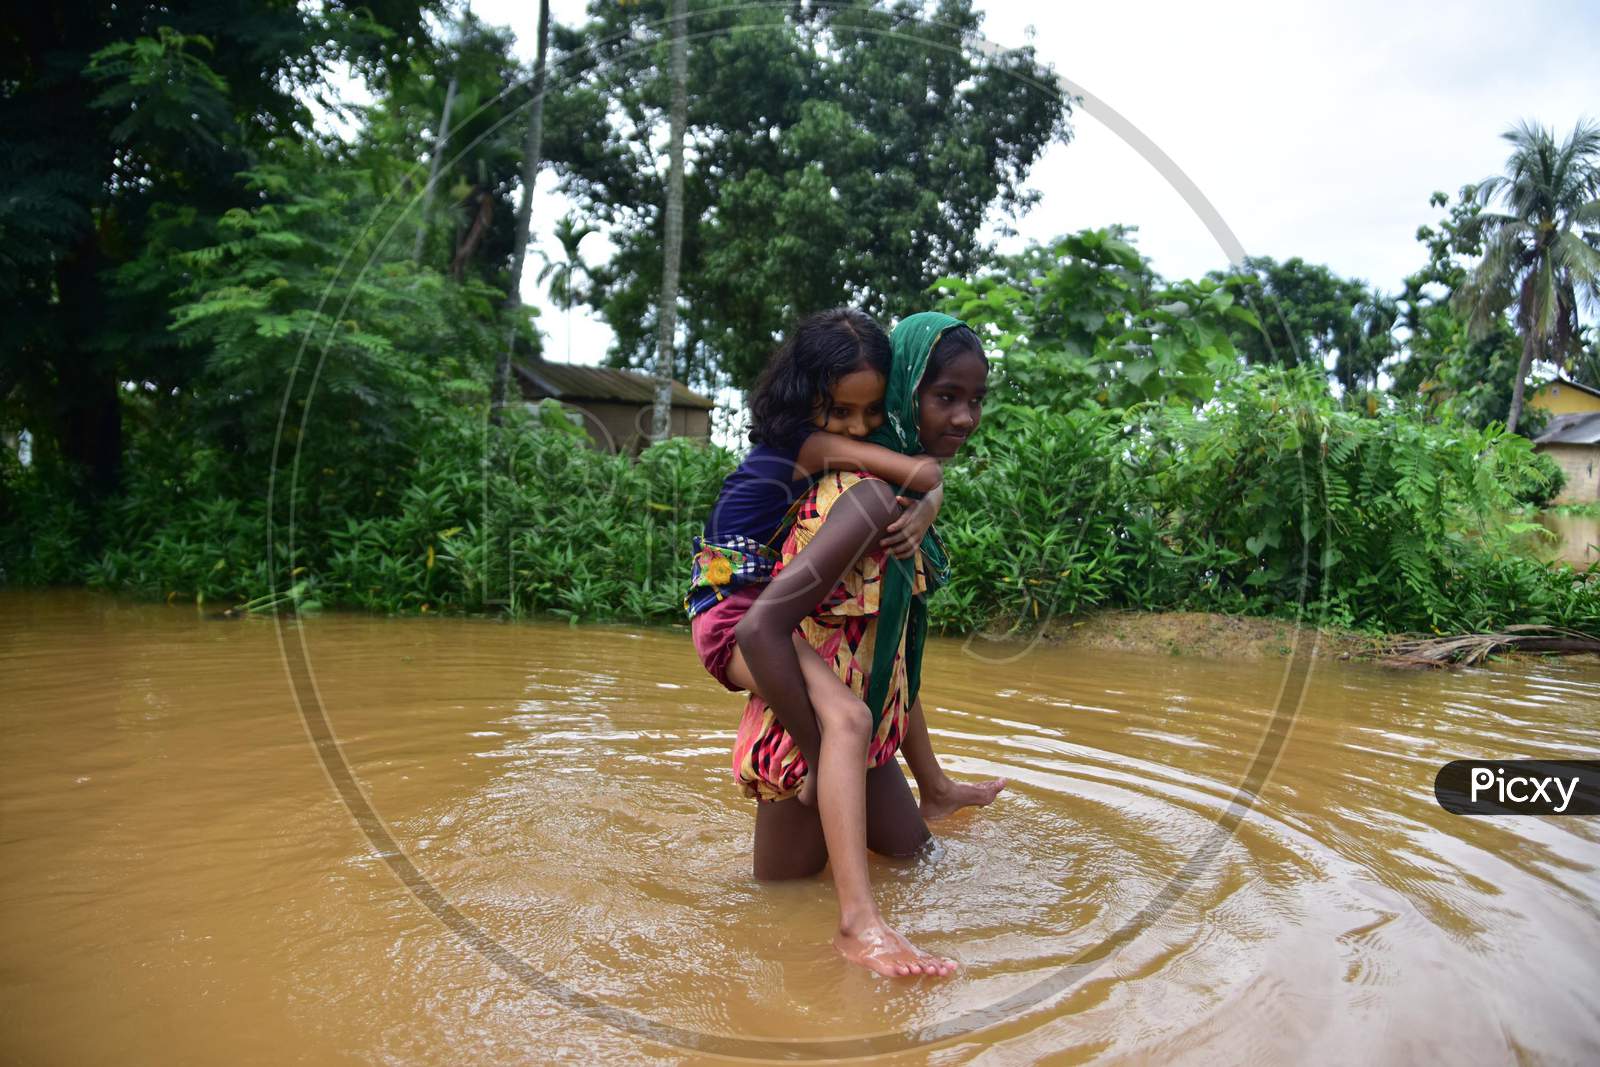 A girl carries another girl on her back as she wades through the floodwaters in the flood-affected village in Nagaon, Asam on July 22, 2020